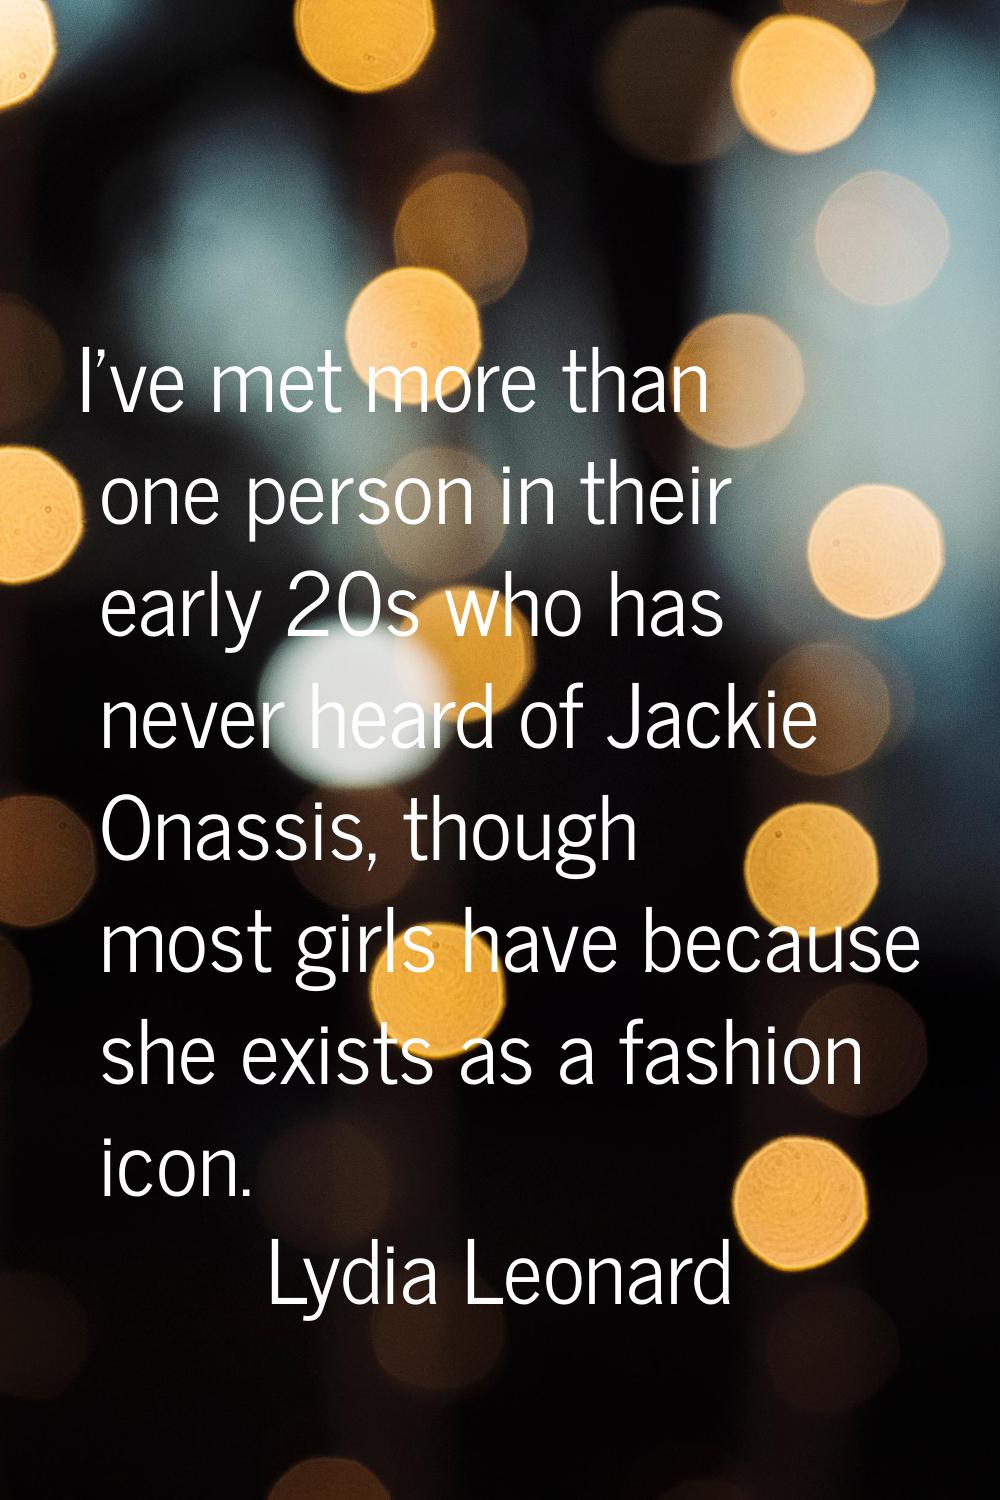 I've met more than one person in their early 20s who has never heard of Jackie Onassis, though most